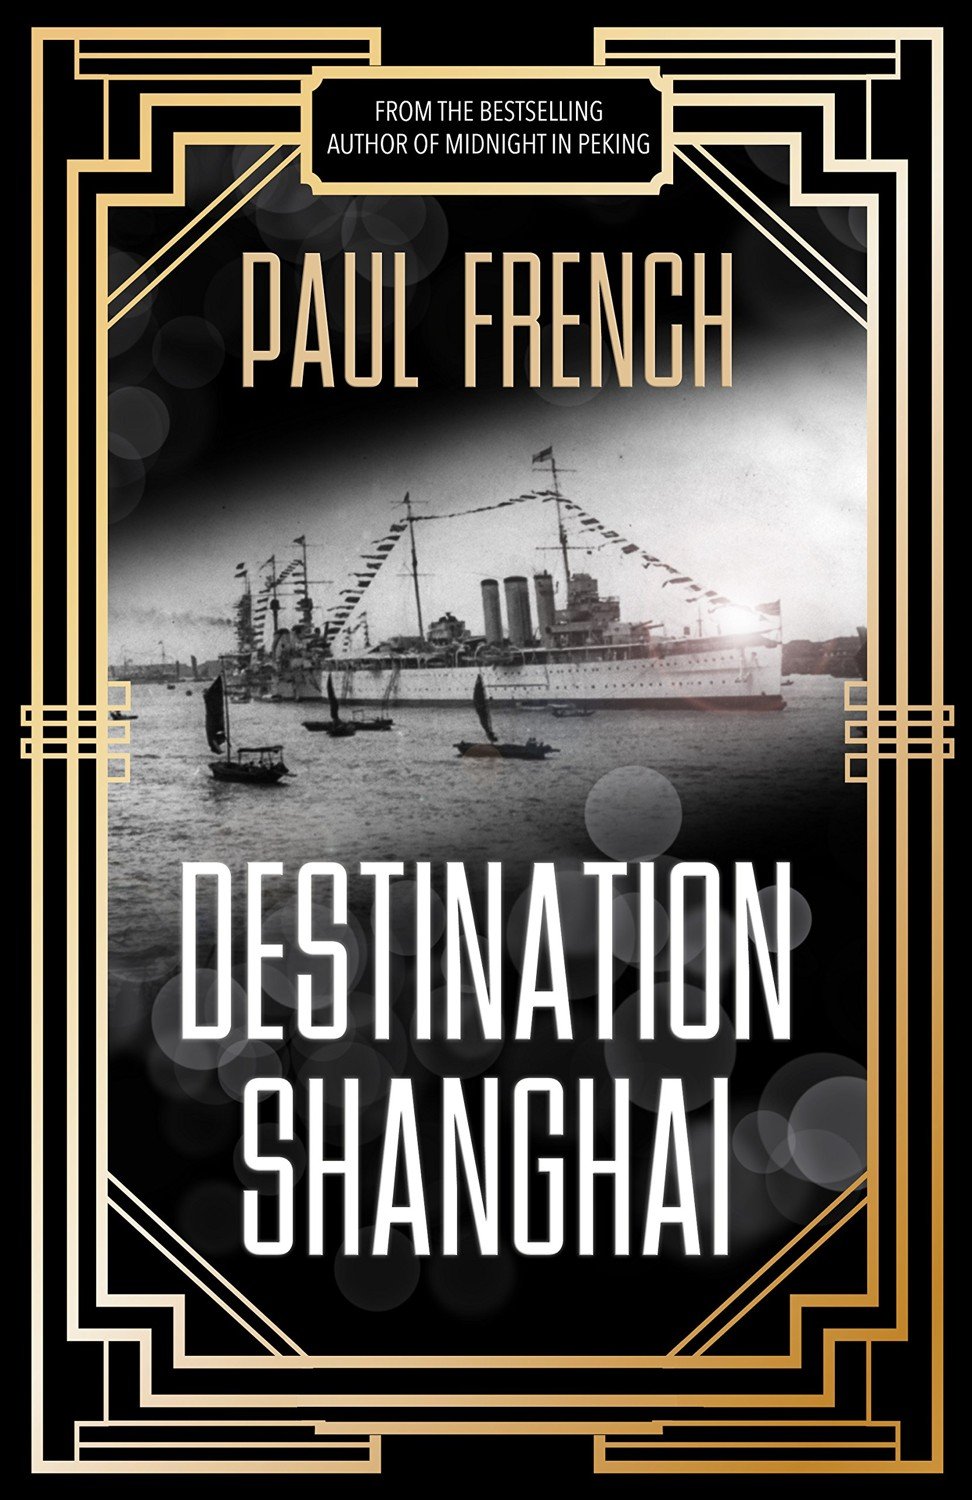 The cover of Paul French’s Destination Shanghai.